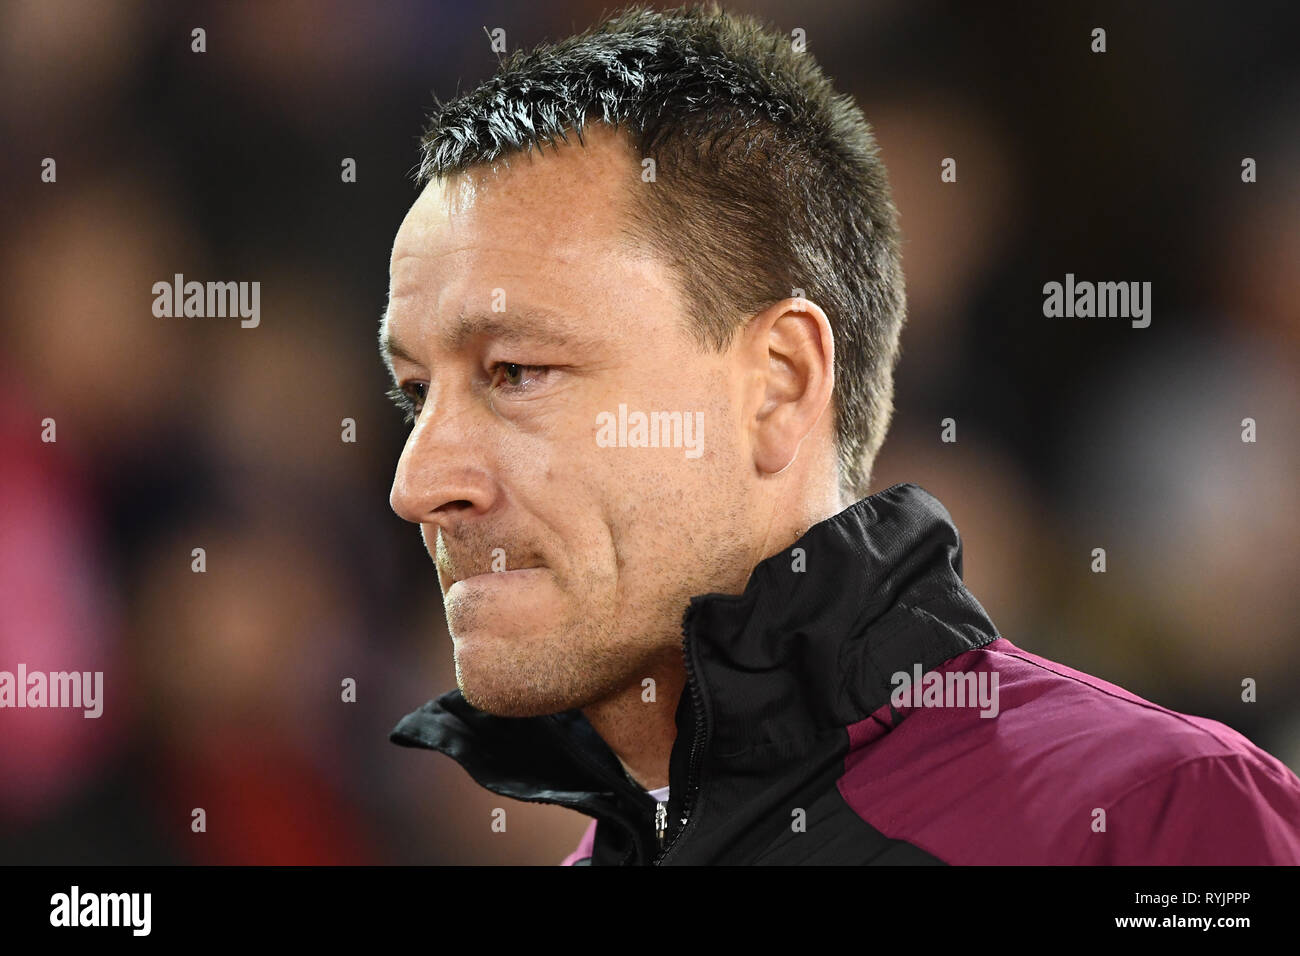 13th March 2019, City Ground, Nottingham, England ; Sky Bet Championship, Nottingham Forest v Aston Villa : Aston Villa's John Terry  Credit: Jon Hobley/News Images  English Football League images are subject to DataCo Licence Stock Photo